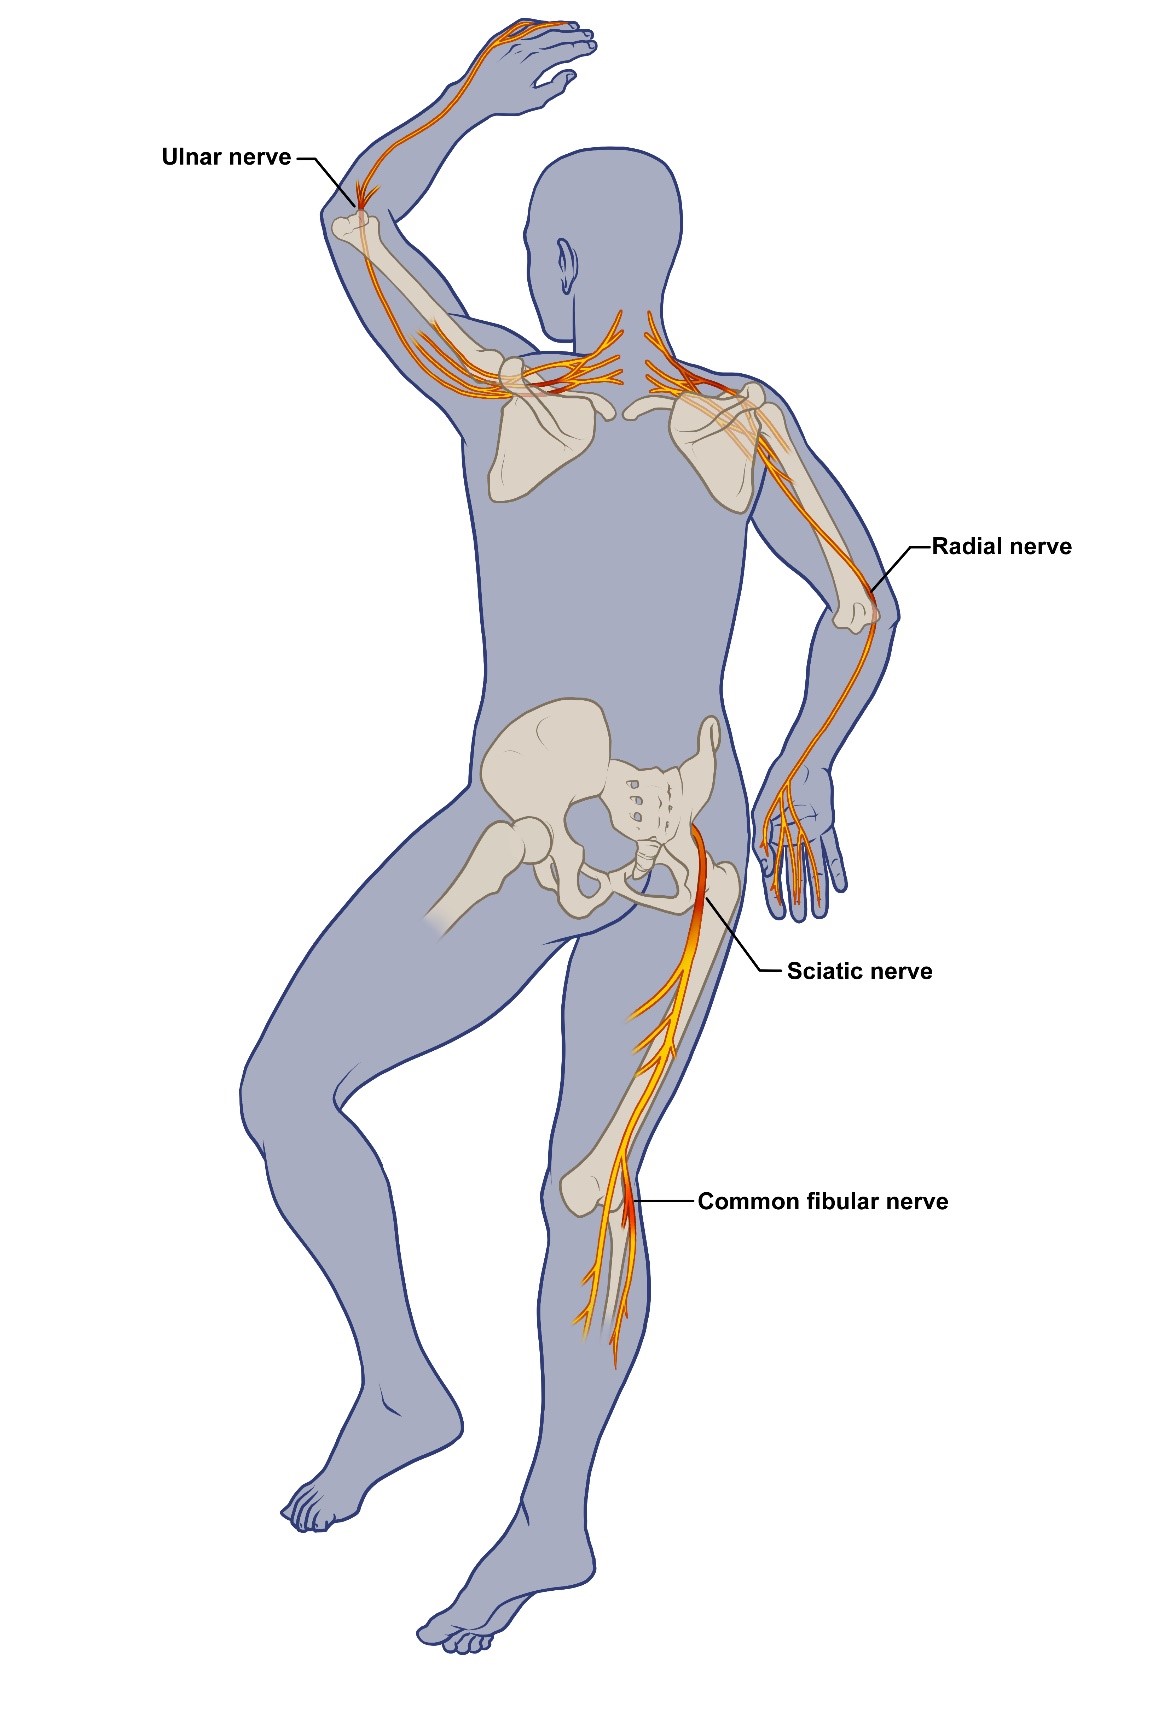 Nerve Damage Sites from COVID